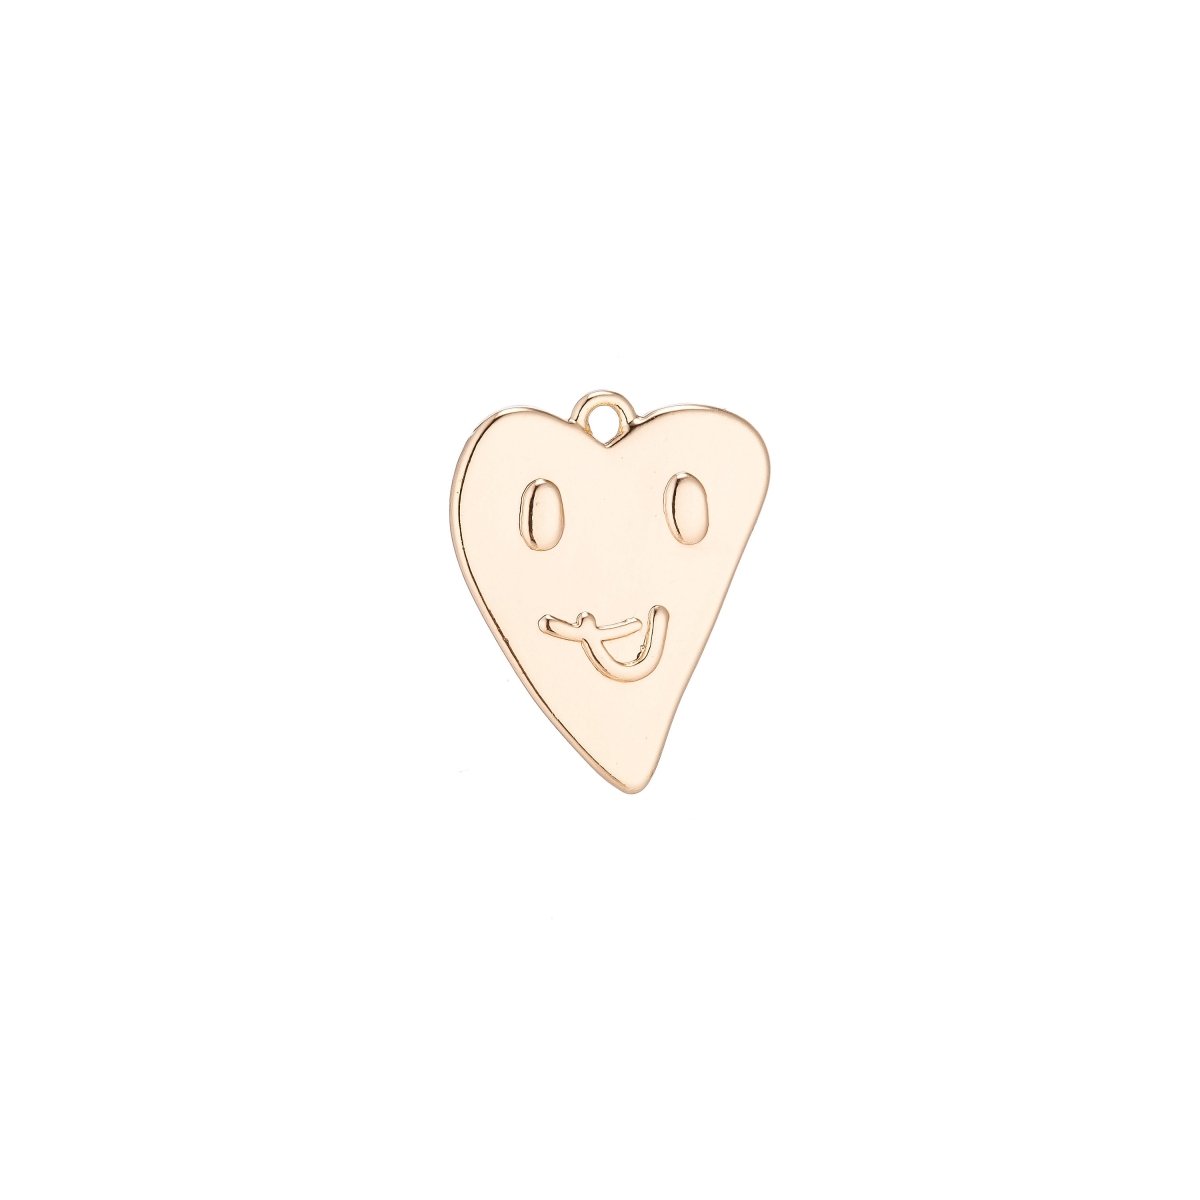 18K Gold Filled Heart shaped emoticon face pendant Coeur Charm for Layer Necklace Earing Jewelry Making Supplies, CL-C-081 - DLUXCA